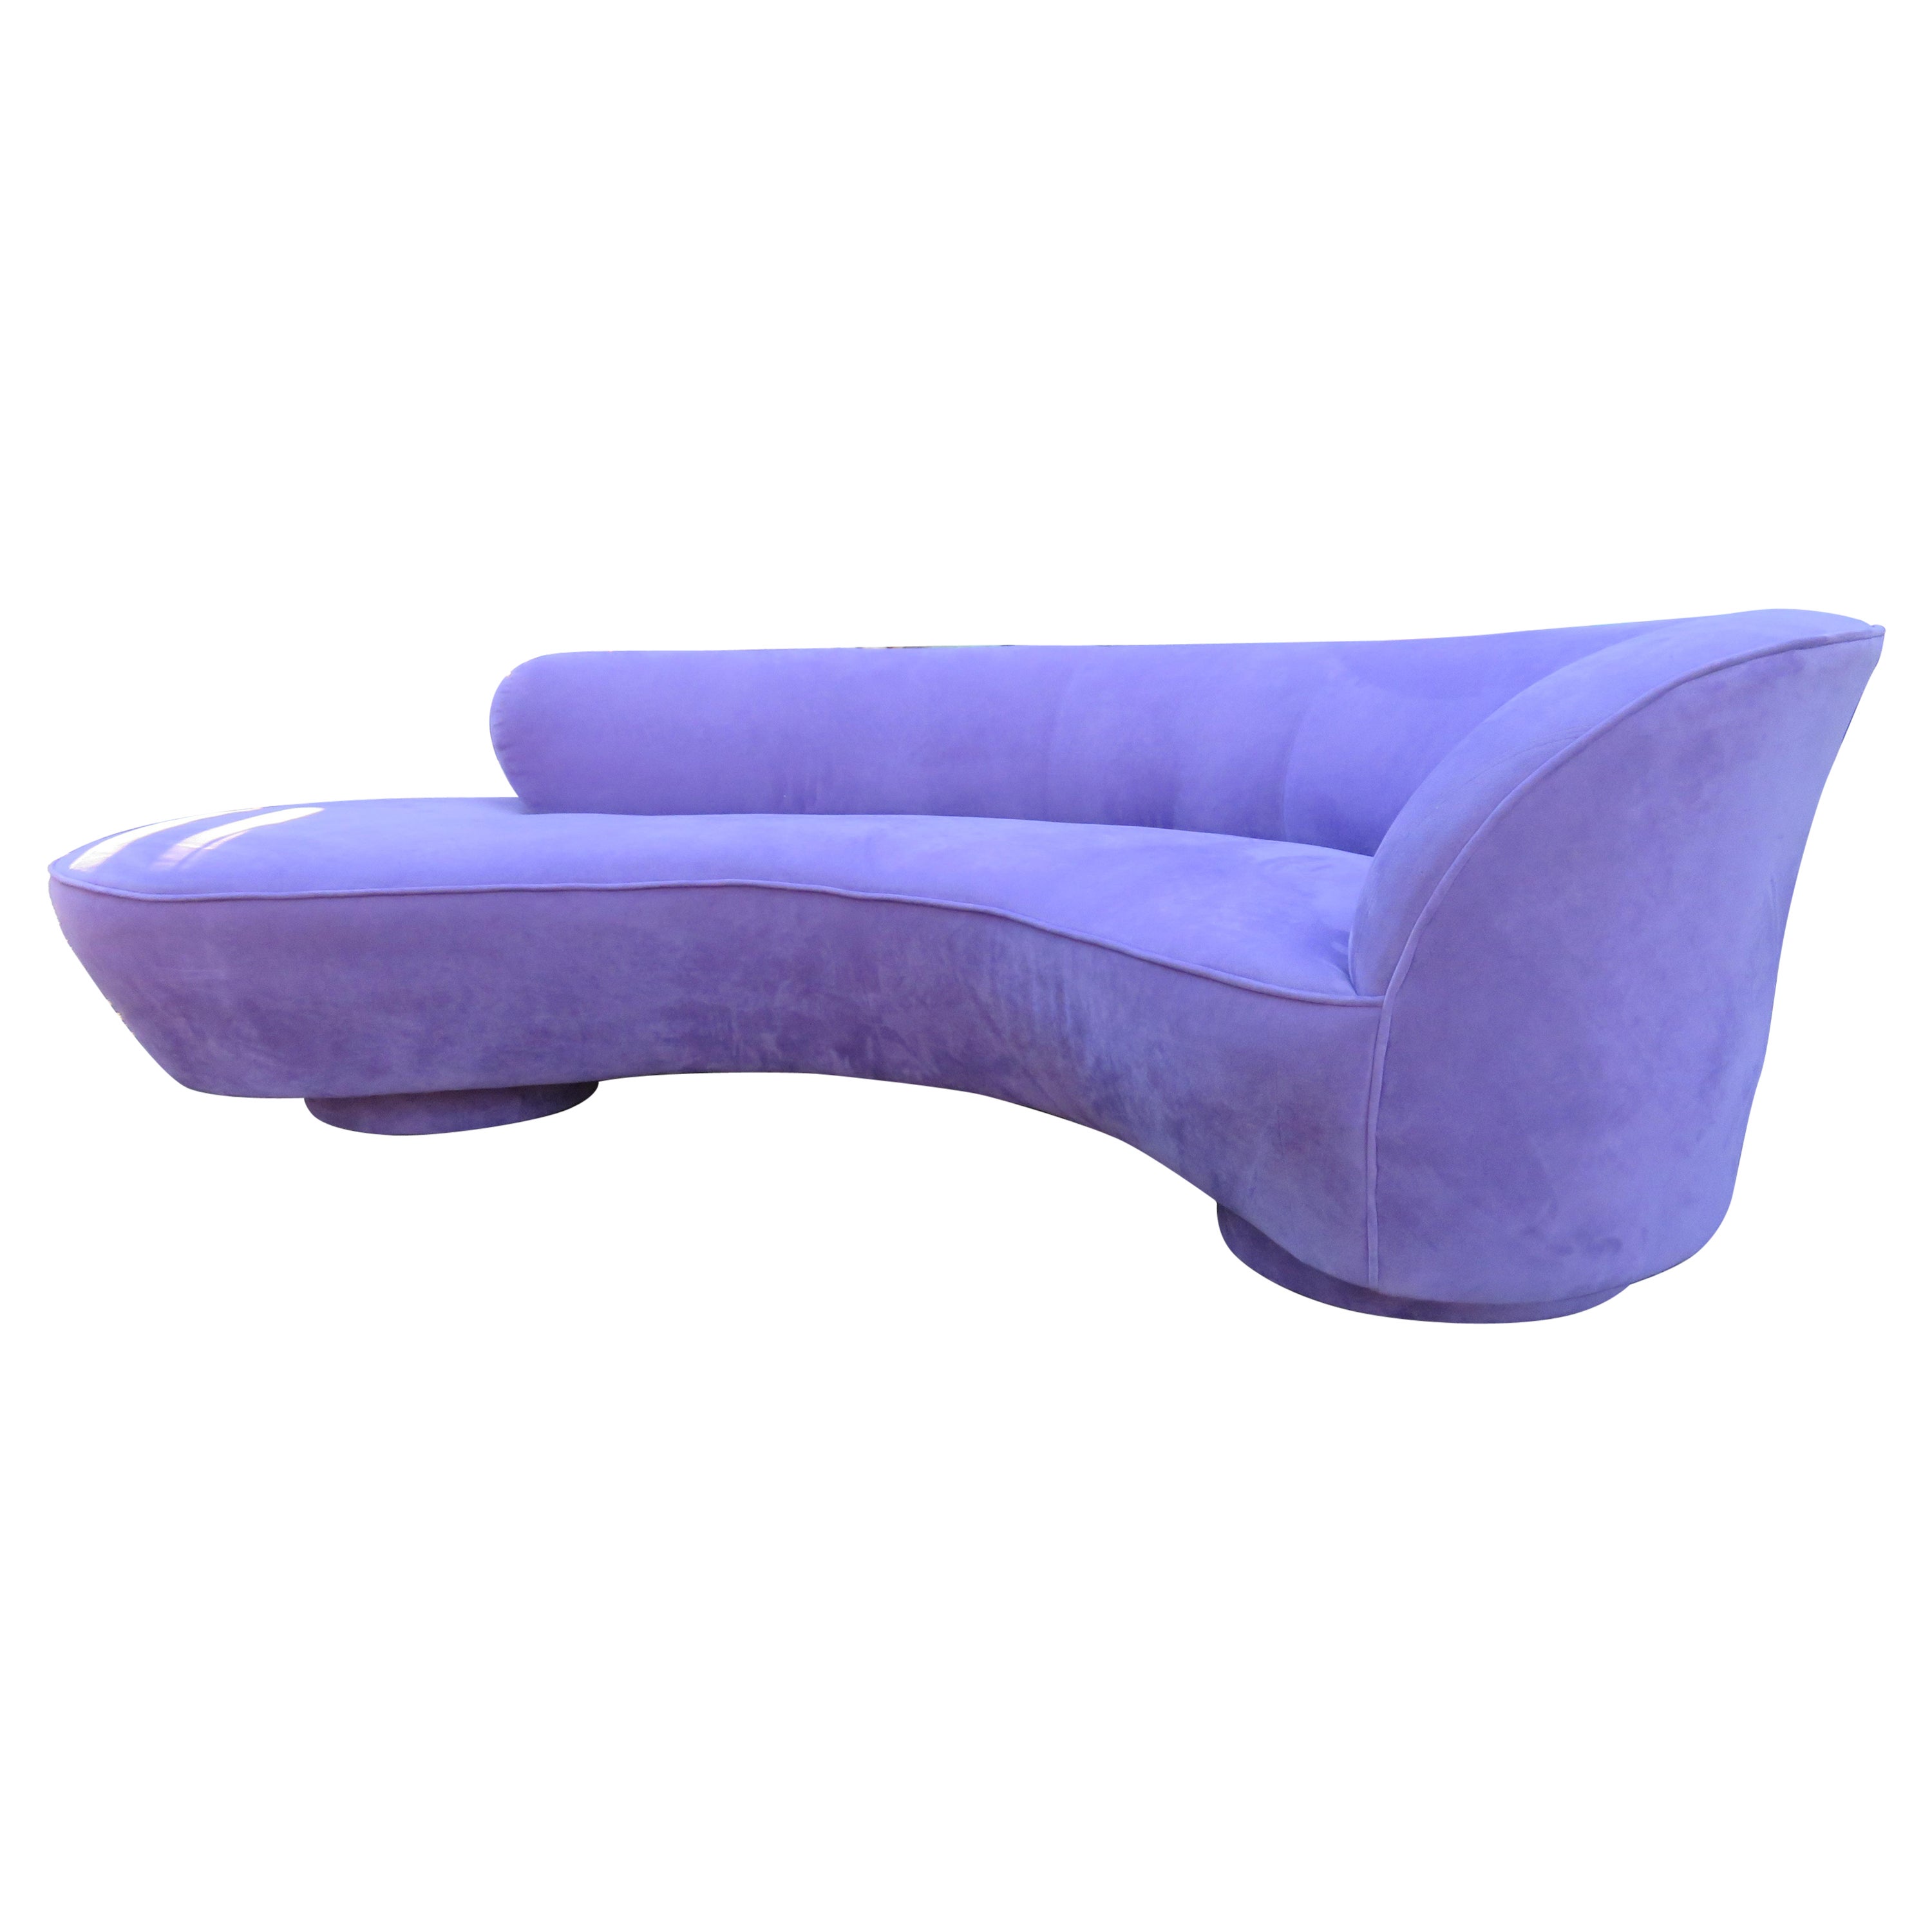 Fabulous Vladimir Kagan Curved Cloud Sofa Directional with Lucite Support